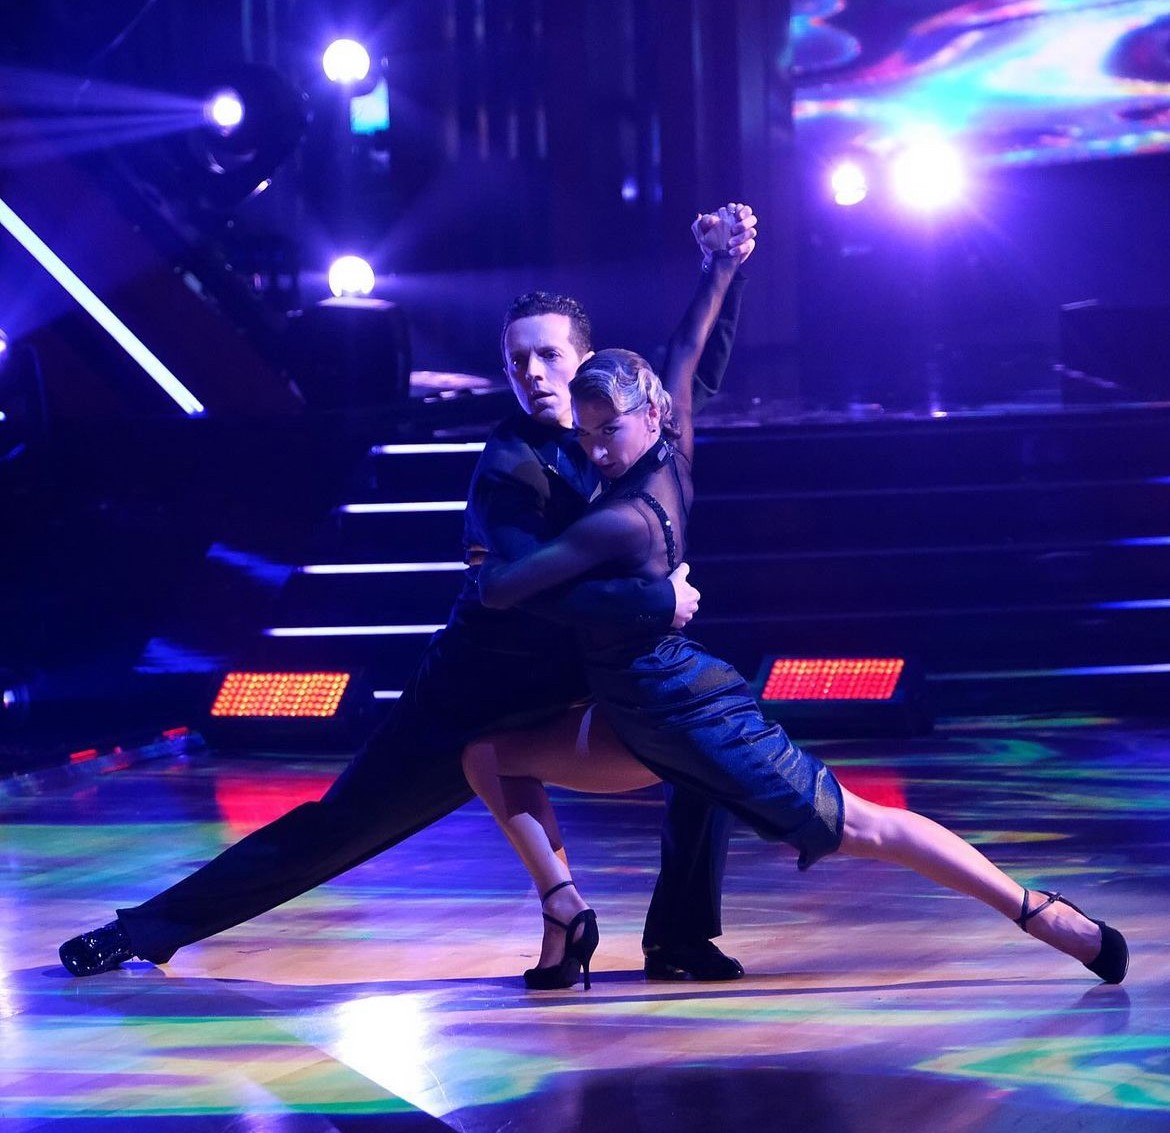 I really appreciated the dramatic energy of this Argentine Tango!